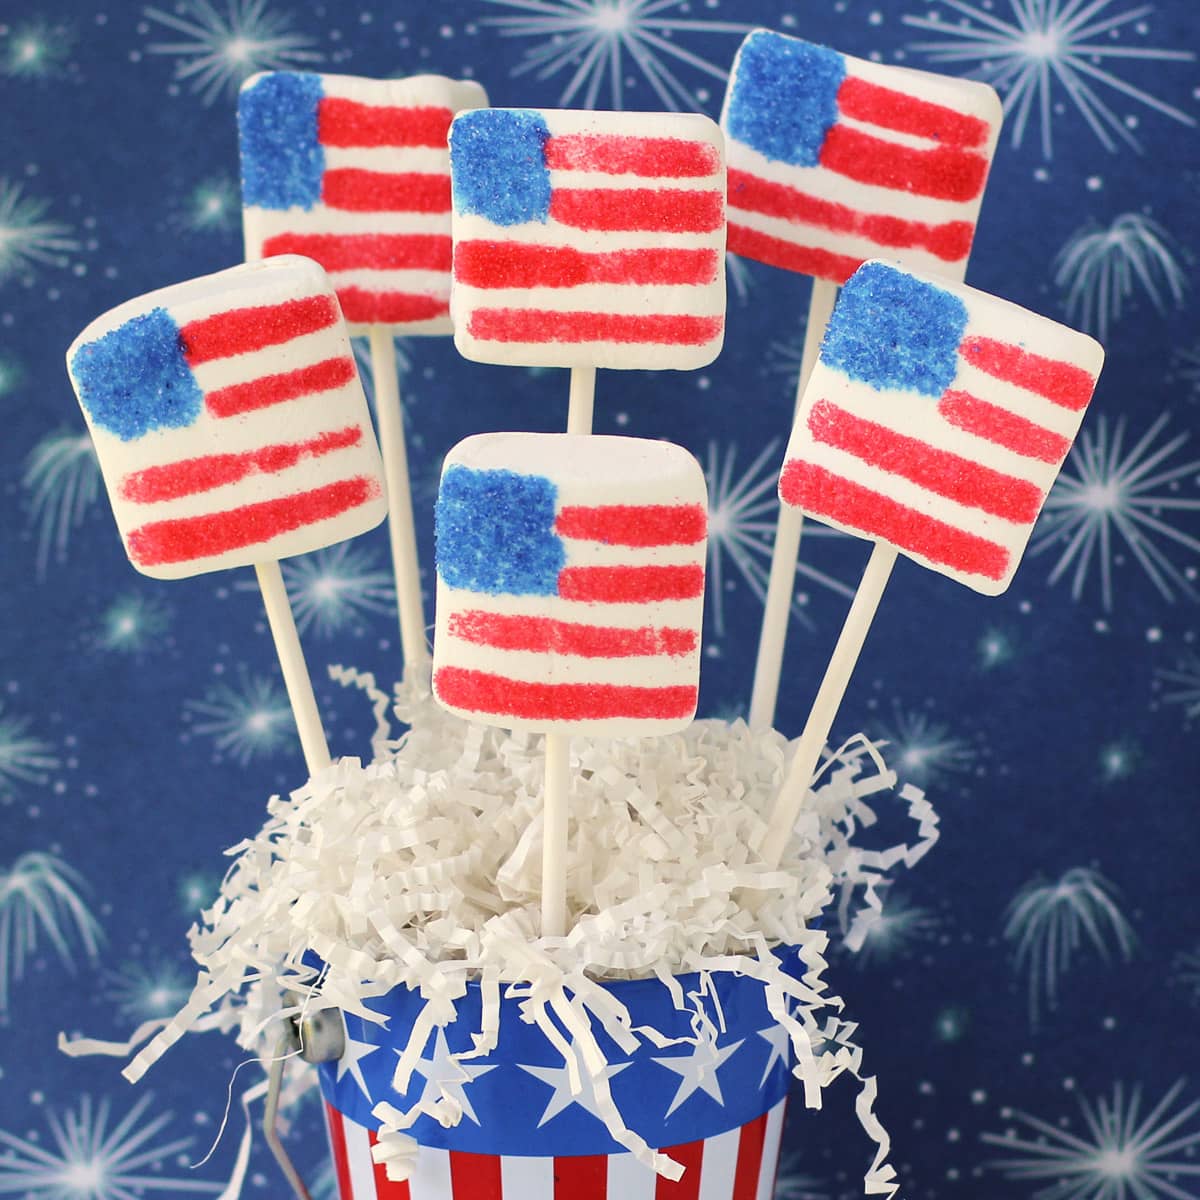 4th of July Marshmallow Flags on lollipop sticks arranged in a patriotic pail filled with white paper shreds displayed in front of fireworks paper.